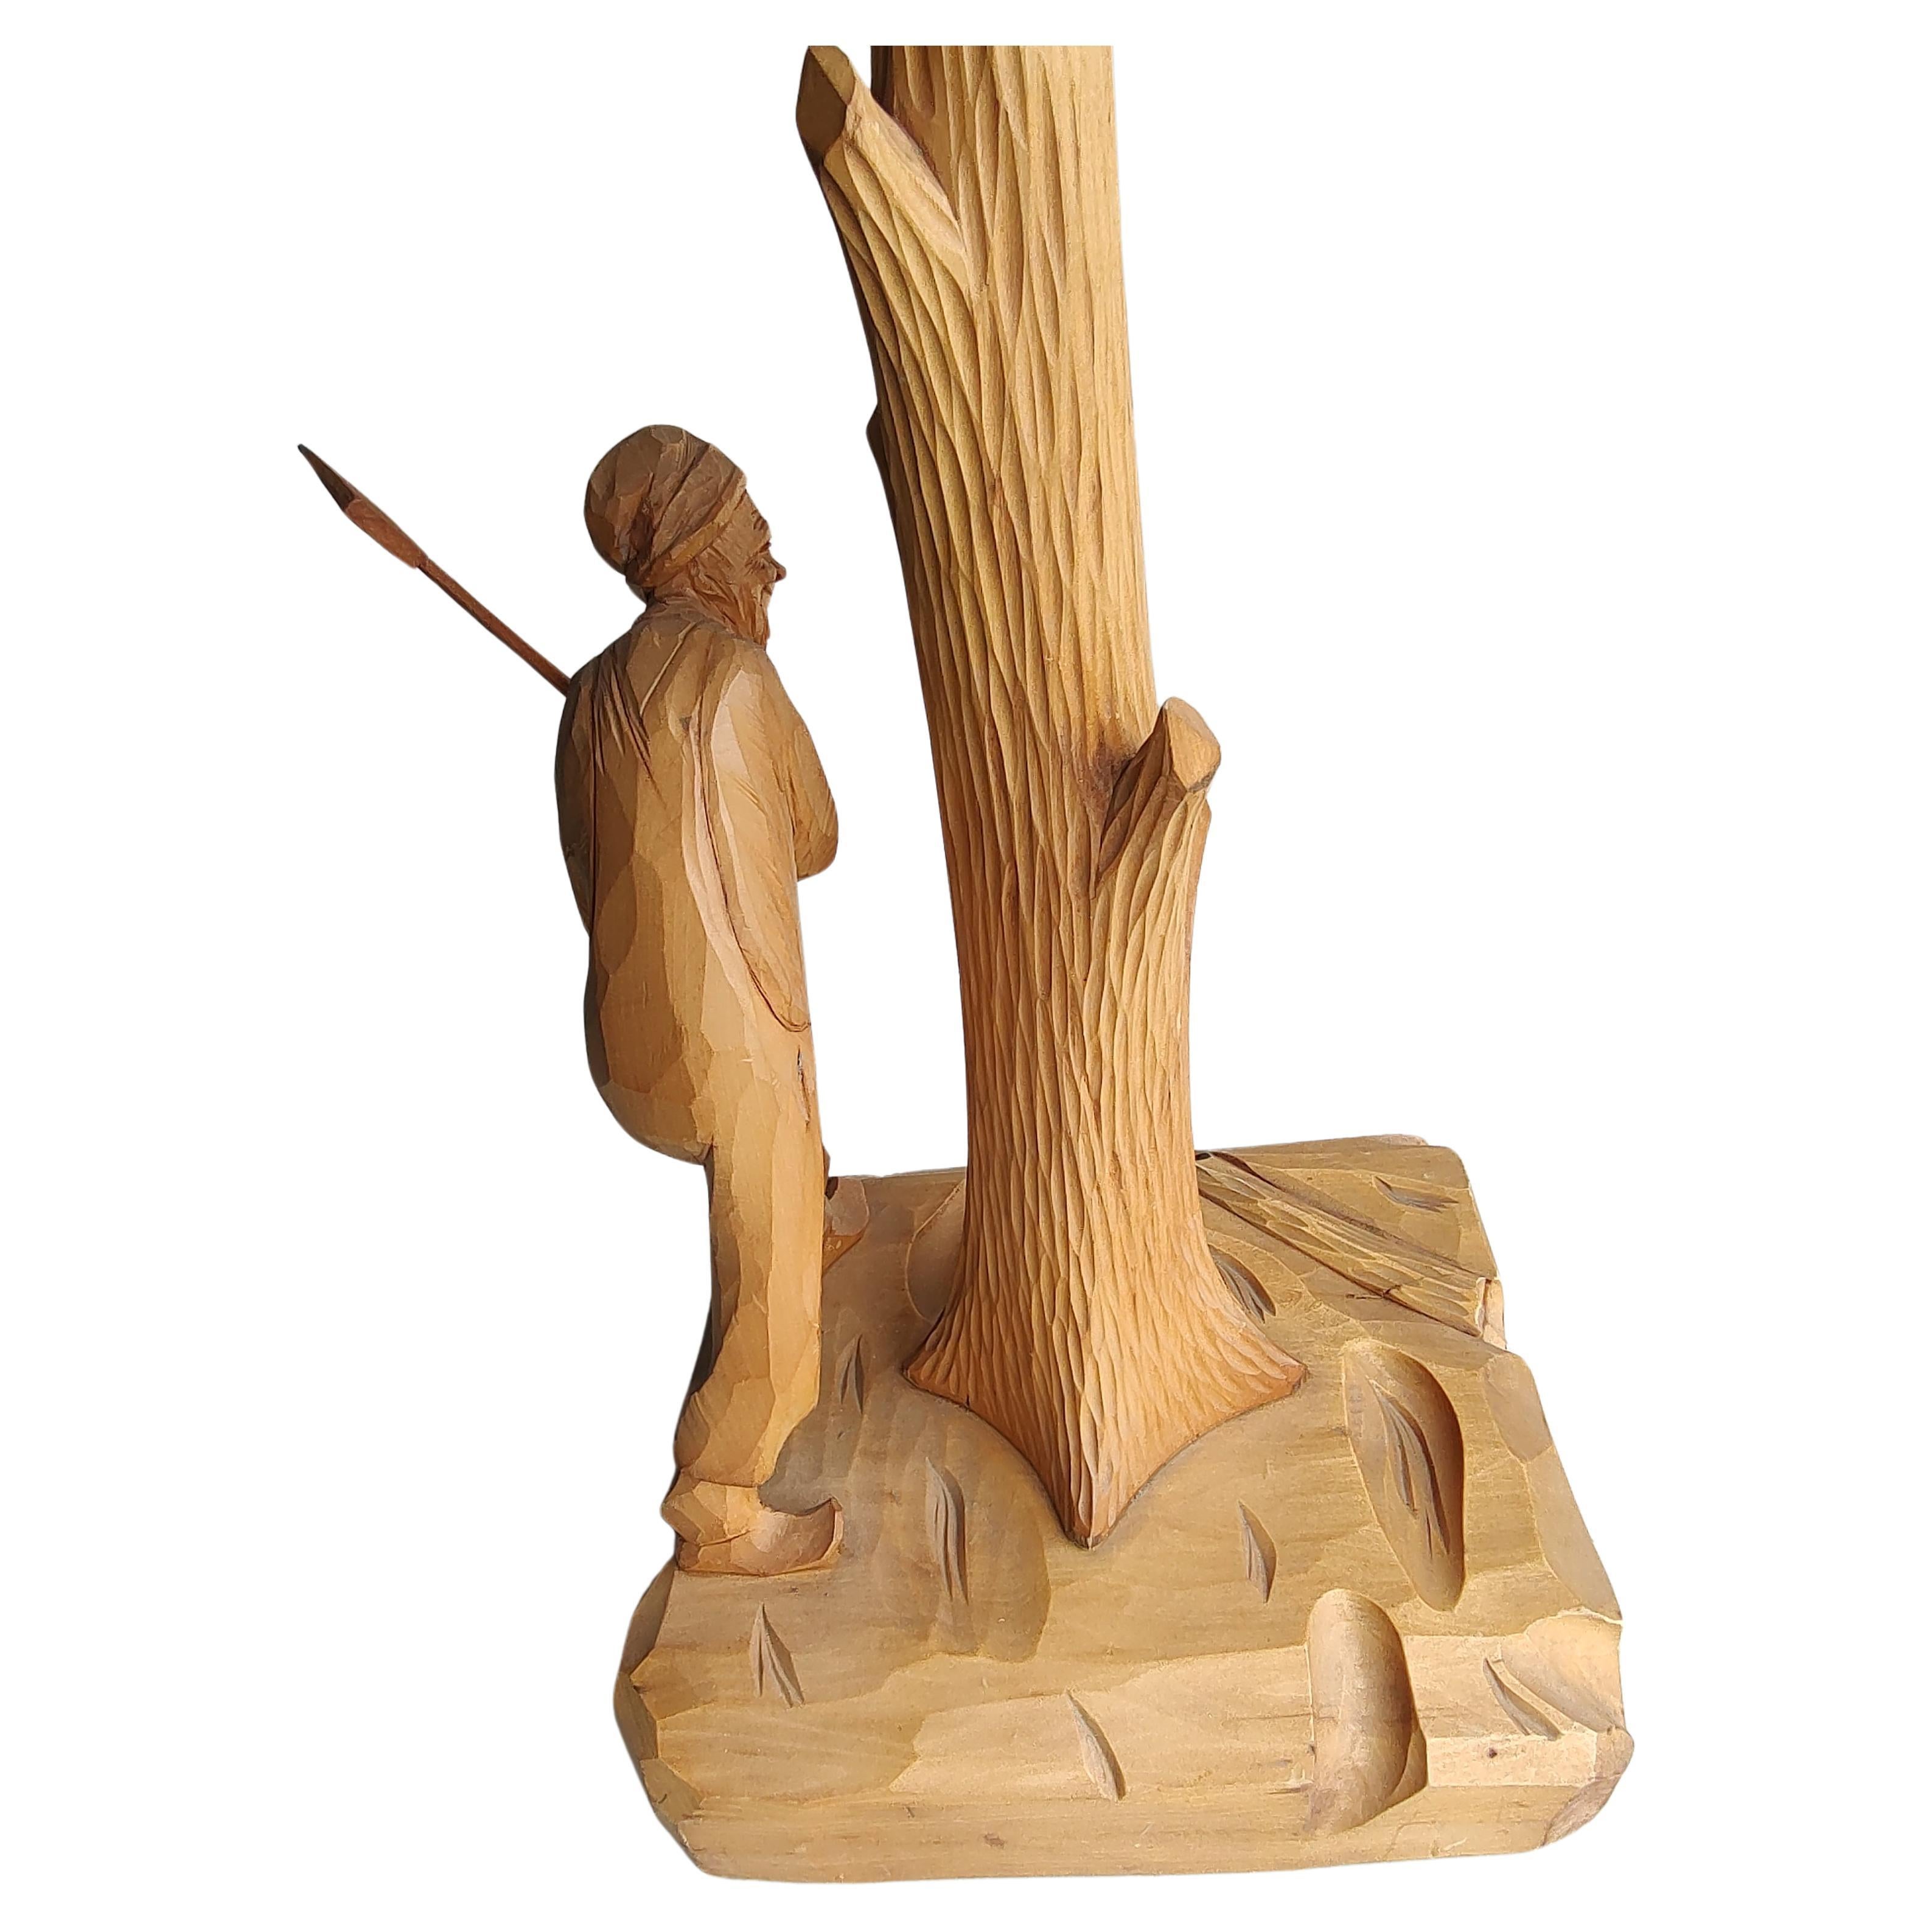 Canadian Midcentury Folk Art Ashstand with Figure Hand Carved by Paul Emile Caron C1969 For Sale